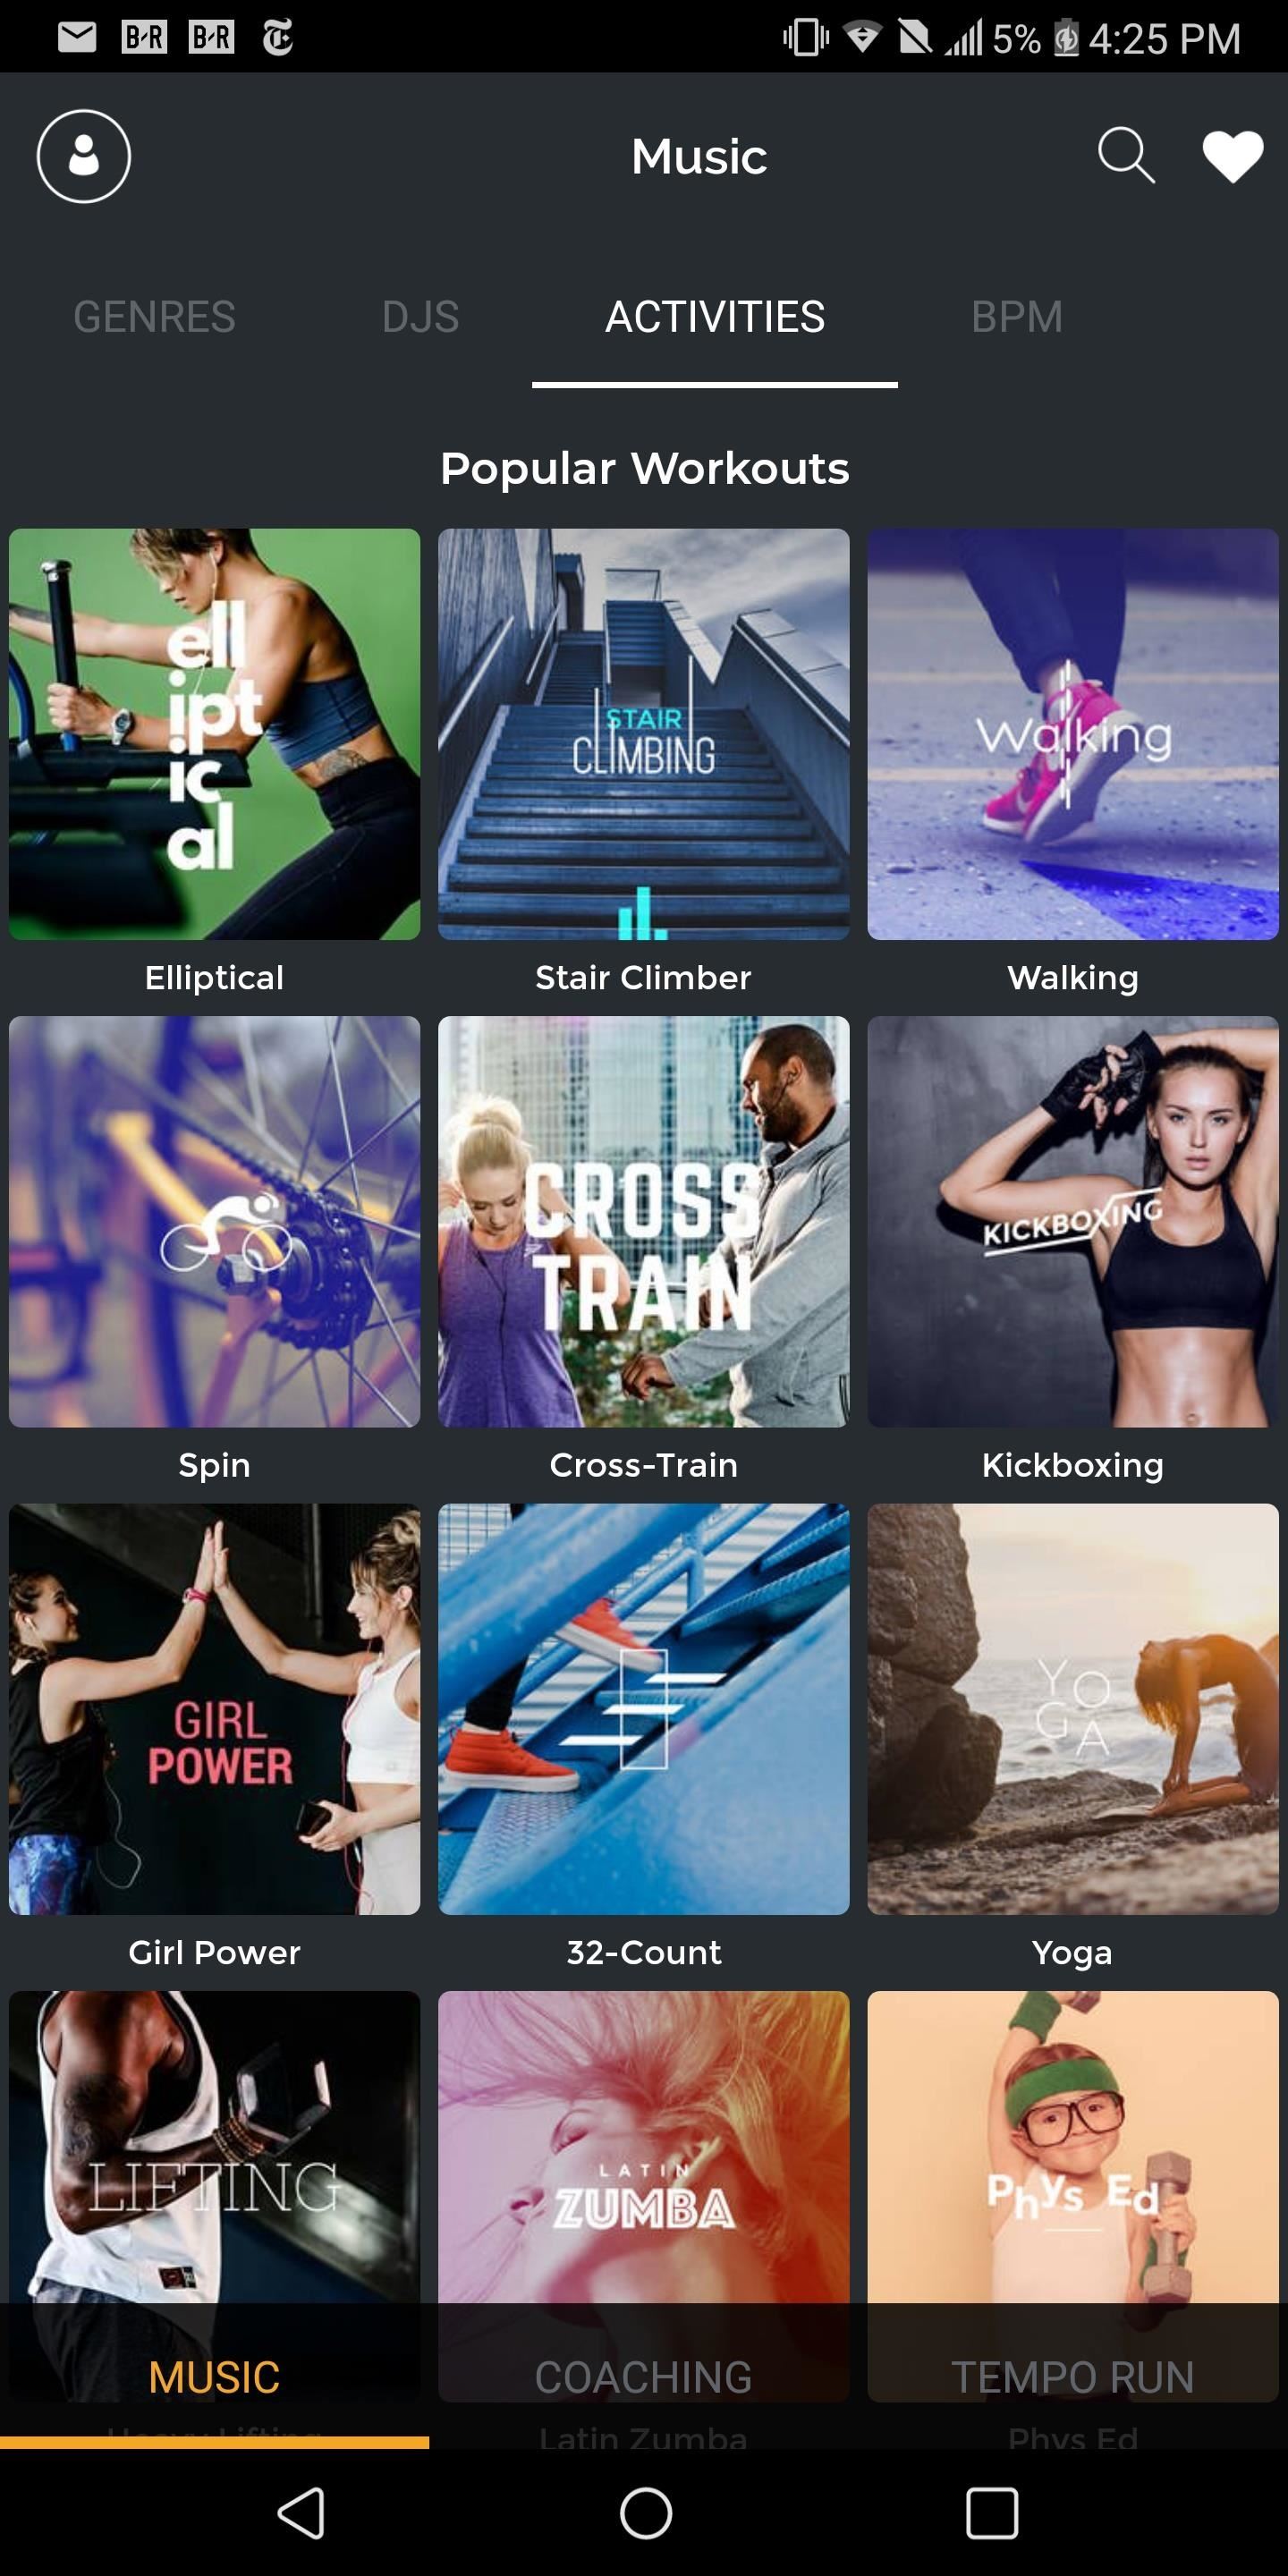 Get the Most Out of the Gym With These 6 Essential Apps